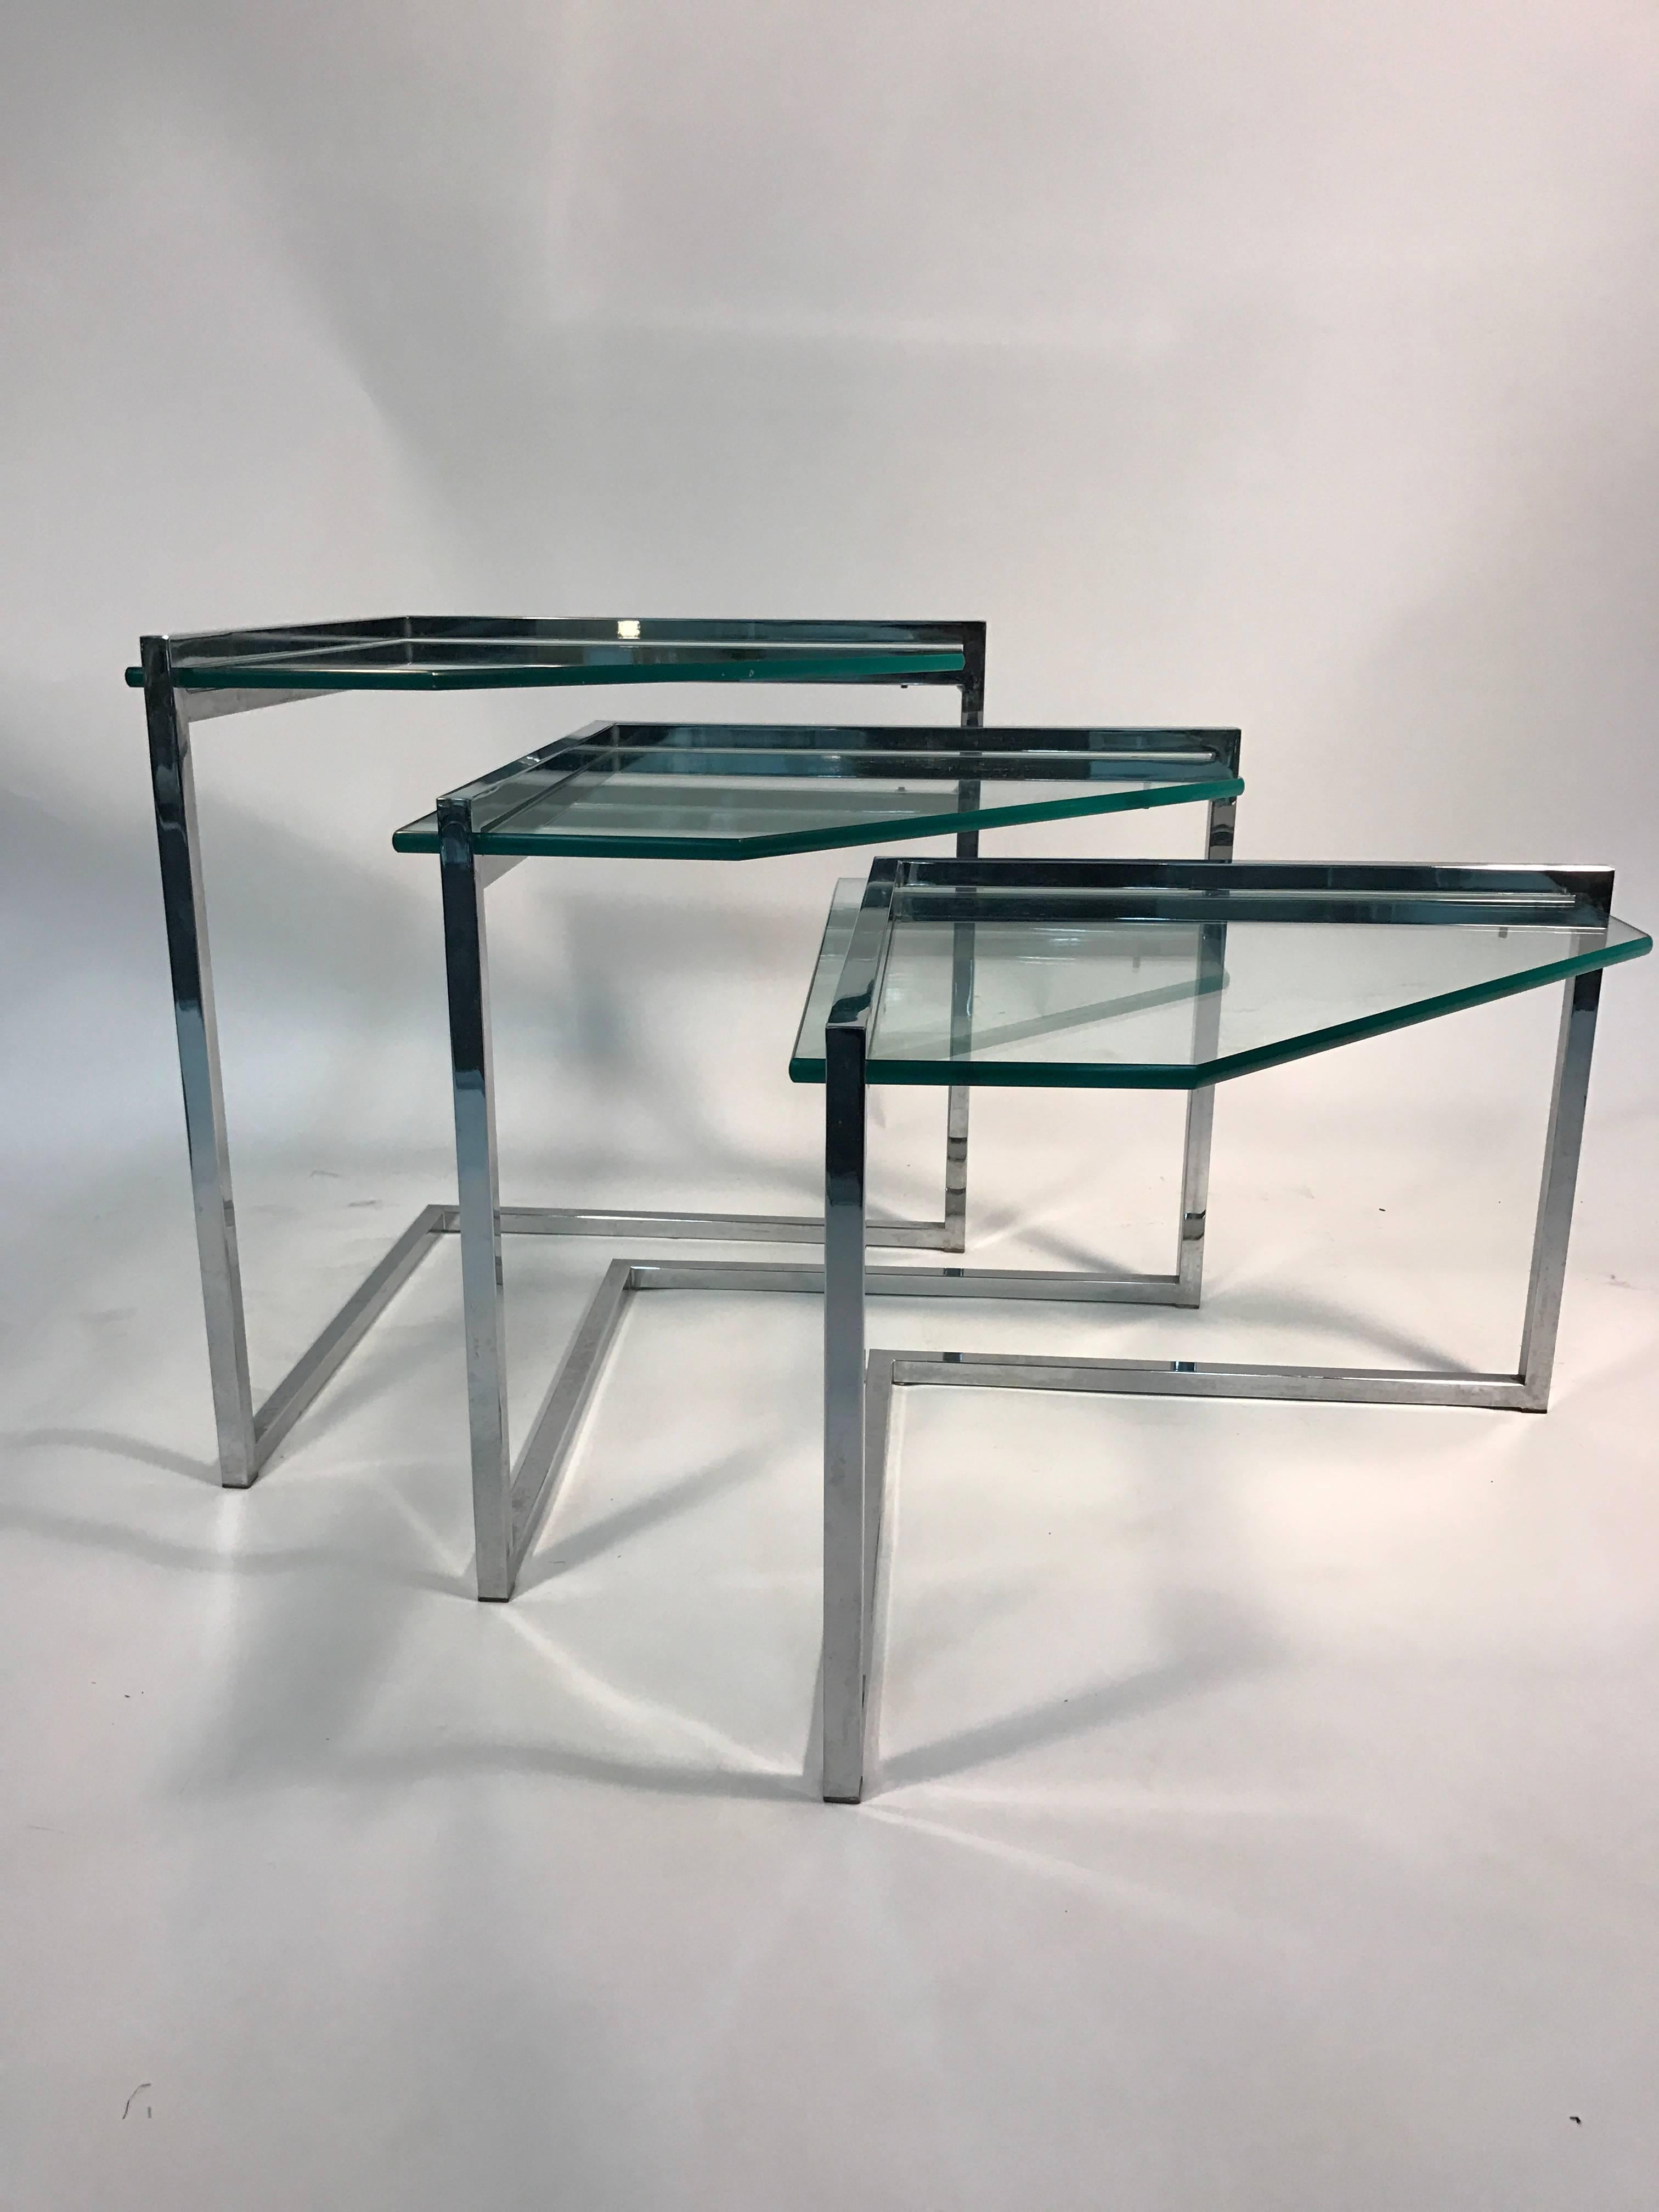 A stunning set of chrome and glass nesting tables with dramatic design by Milo Baughman, circa 1970. Great vintage condition.

Measures: Large 20 x 21 x 21.5 H,
medium: 20 x 21 x 18 H,
small: 20 x 21 x 15 H.